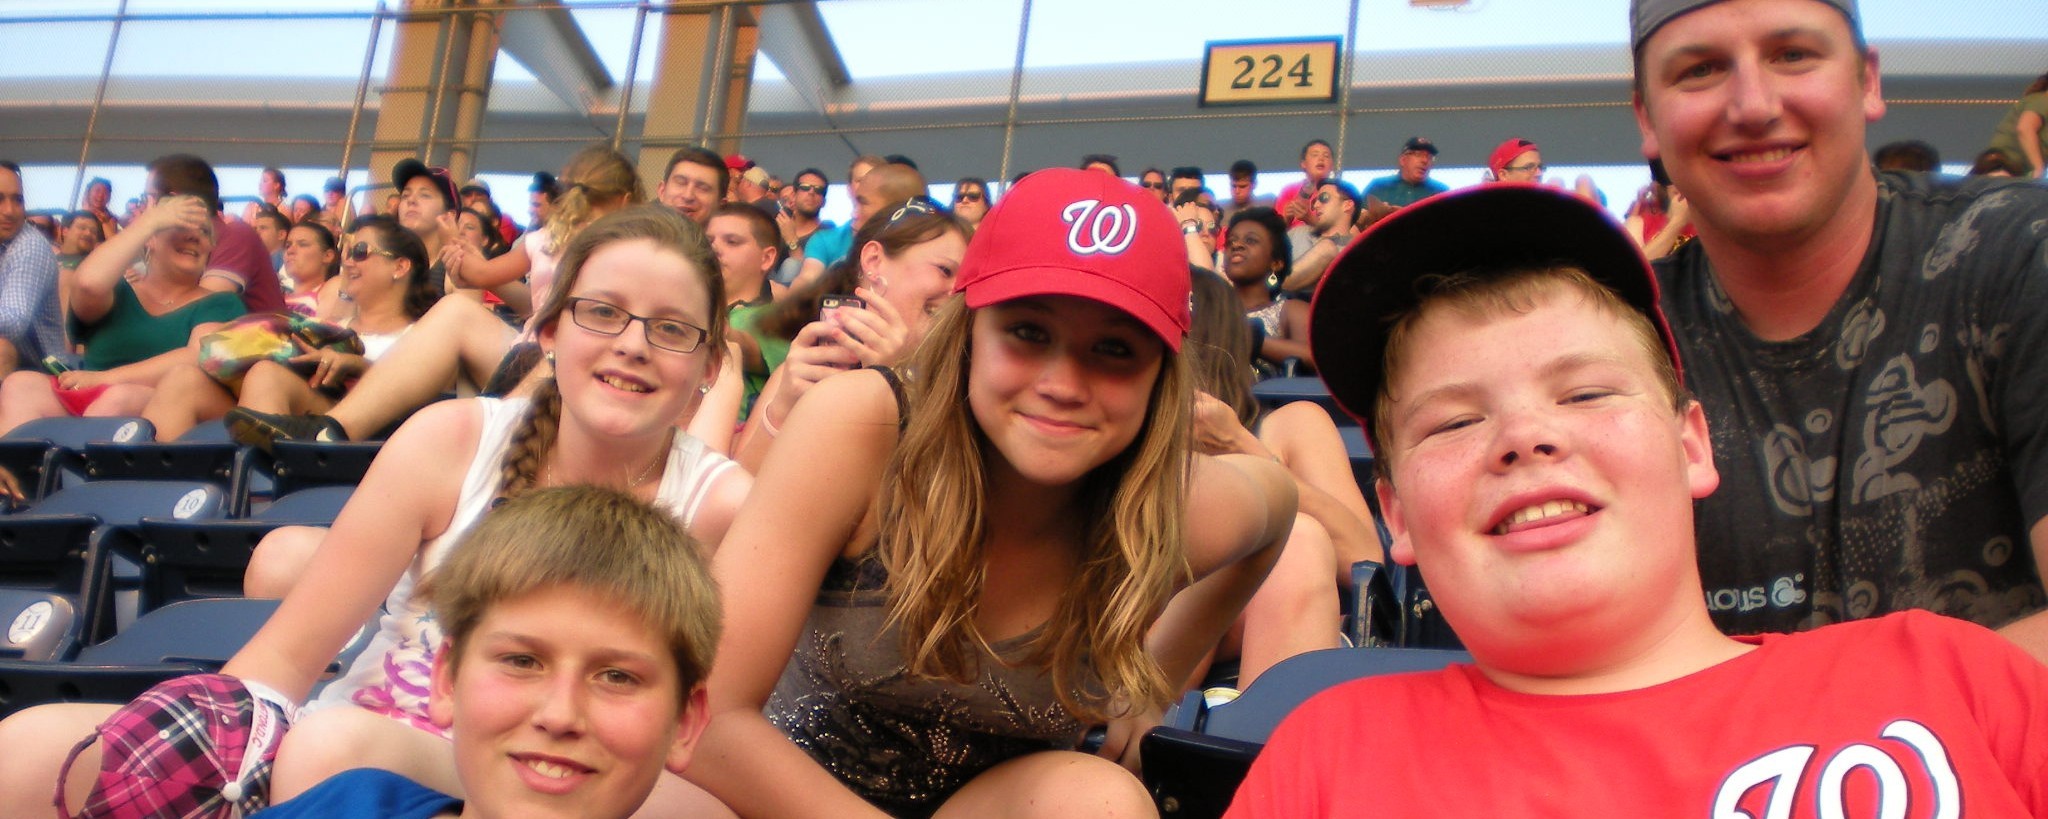 four students and teacher at Nationals Baseball game during National History Day 2014